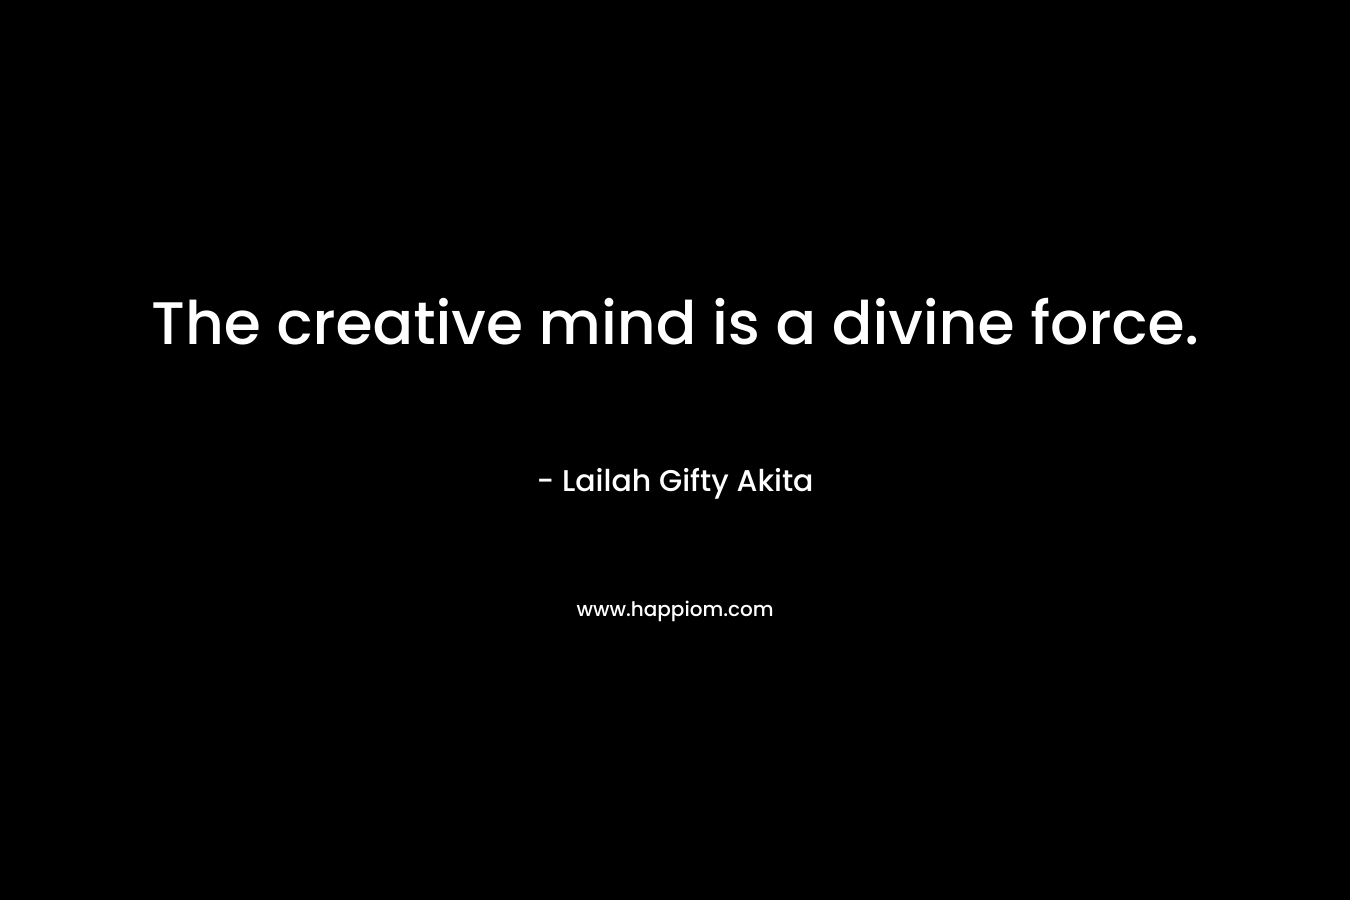 The creative mind is a divine force.